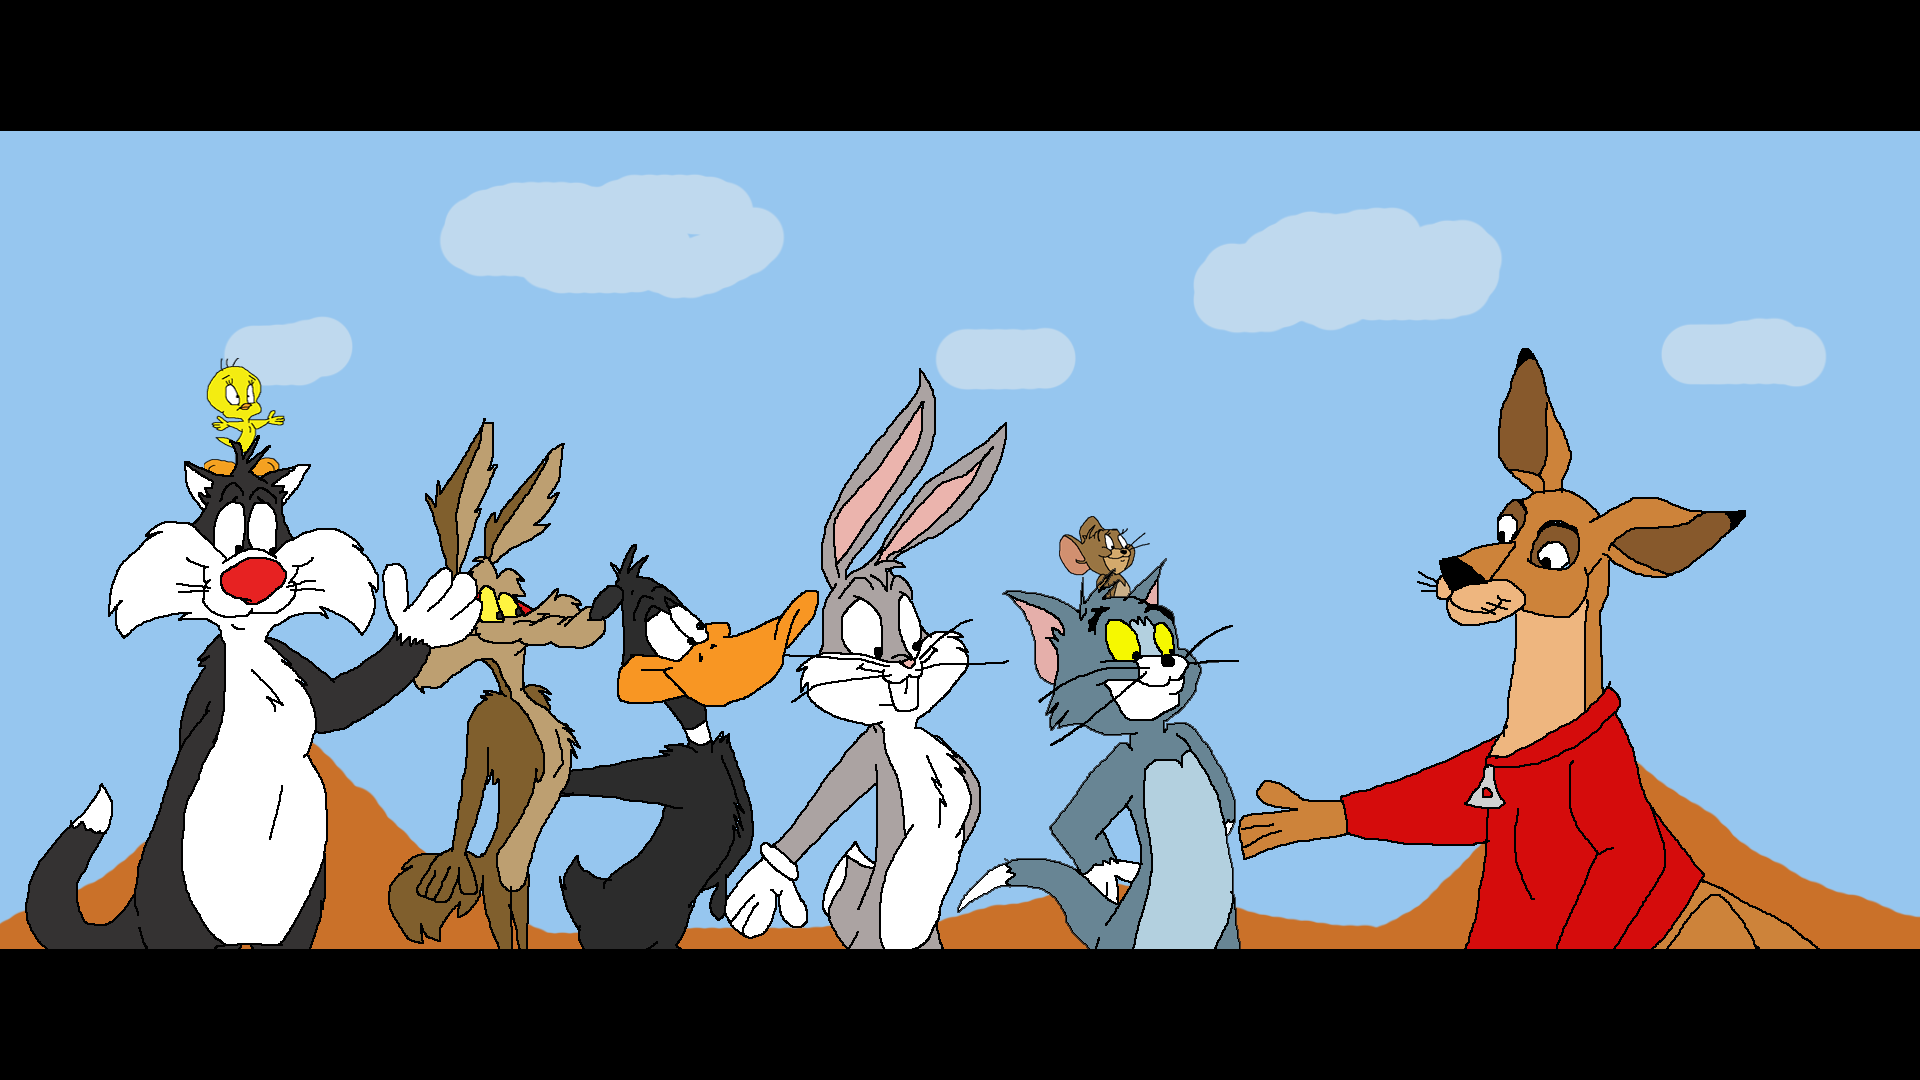 Looney Tunes, Tom and Jerry meet Jackie legs by TomArmstrong20 on